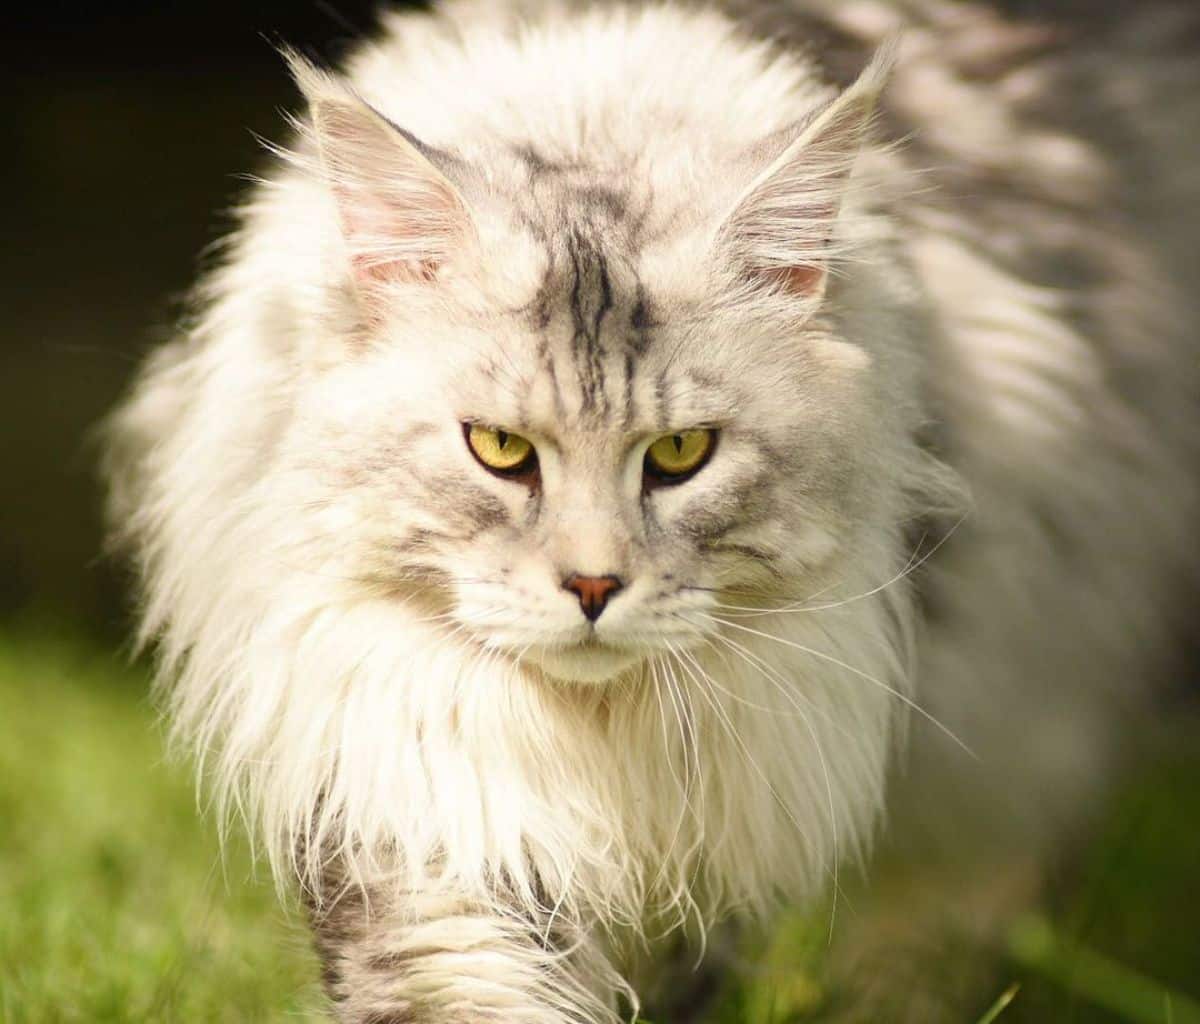 A close-up of a fluffy gray maine coon.